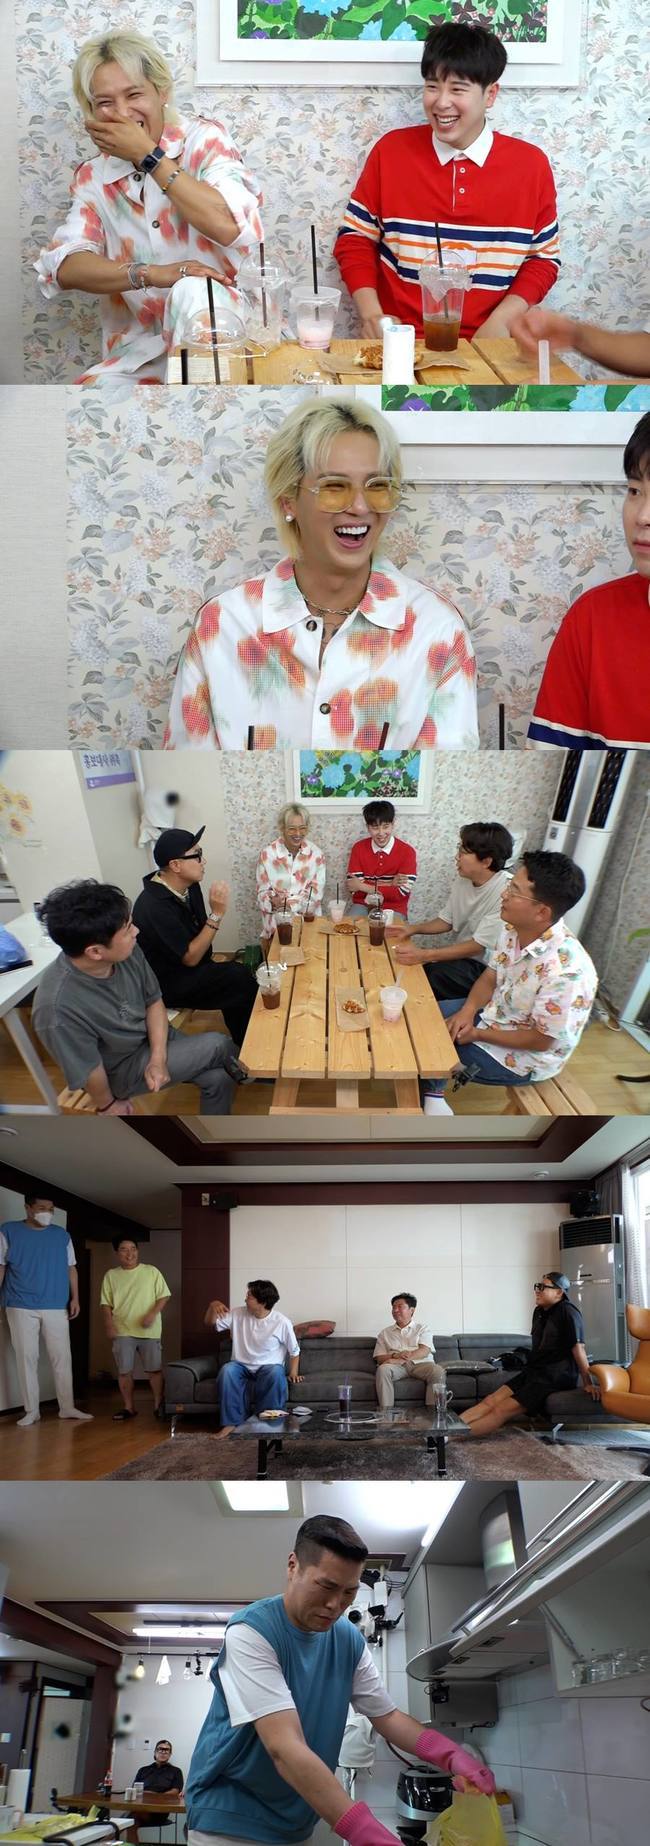 Clean-ducking Seo Jang-hoon cleans Kim Jun-ho house running at the end of mess.On SBS Take off your shoes and dolsing foreman, which will be broadcasted on July 13, Song Min-ho, P.O, the best friend of the entertainment industry,Im offering you chemi.On this day, Song Min-ho and P.O, who visited Lim Won-hees house, held a heated debate on Thumbs Standard with Dolsing Forman.Dolsing Forman said, Tok-a-sum and Theater-masked thumb and said, Thumbs standard transcending imagination. So Song Min-ho and P.O were surprised to say, Oh, it is not.Dolling Forman, who continued to want to get close to his sisters, asked the question, Who does it look like the most sophisticated among us?, which embarrassed the two.Dolsing Forman showed a strange tension when he saw the two people in trouble. After a while, Song Min-ho showed a shocking inner mind and shocked Dolsing Forman.Also at the end of the broadcast, Kim Jun-hos house is expected to attract attention with another stone-singing Seo Jang-hoon.The entertainment industry representative, Seo Jang-hoon, was shocked to see the shocking Kim Jun-hos house condition.Is not it crazy? said Seo Jang-hoon, who was nagging about the worry, saying that he started to clean up and started to clean up.